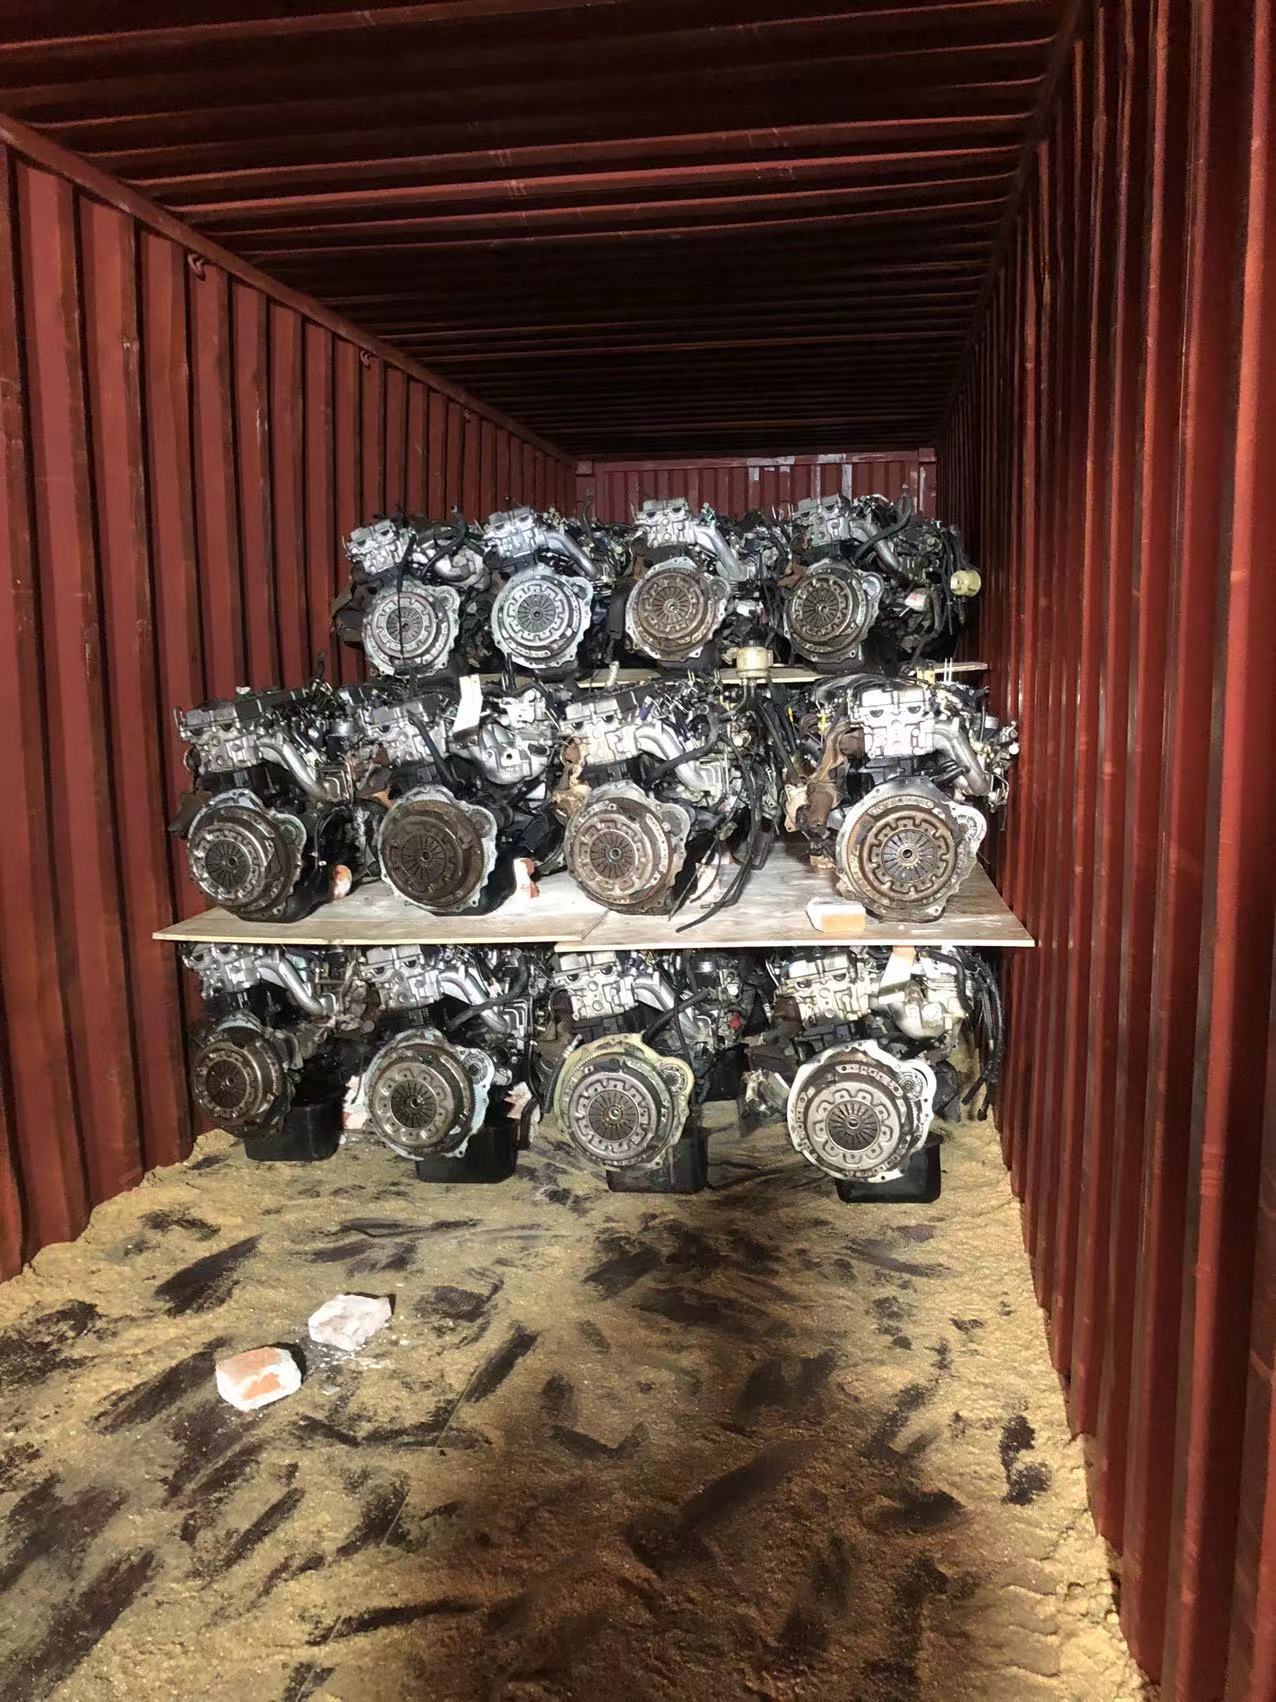 KA24 2.4L engine gasoline fuel xtrail engine load container to Mexico (图5)